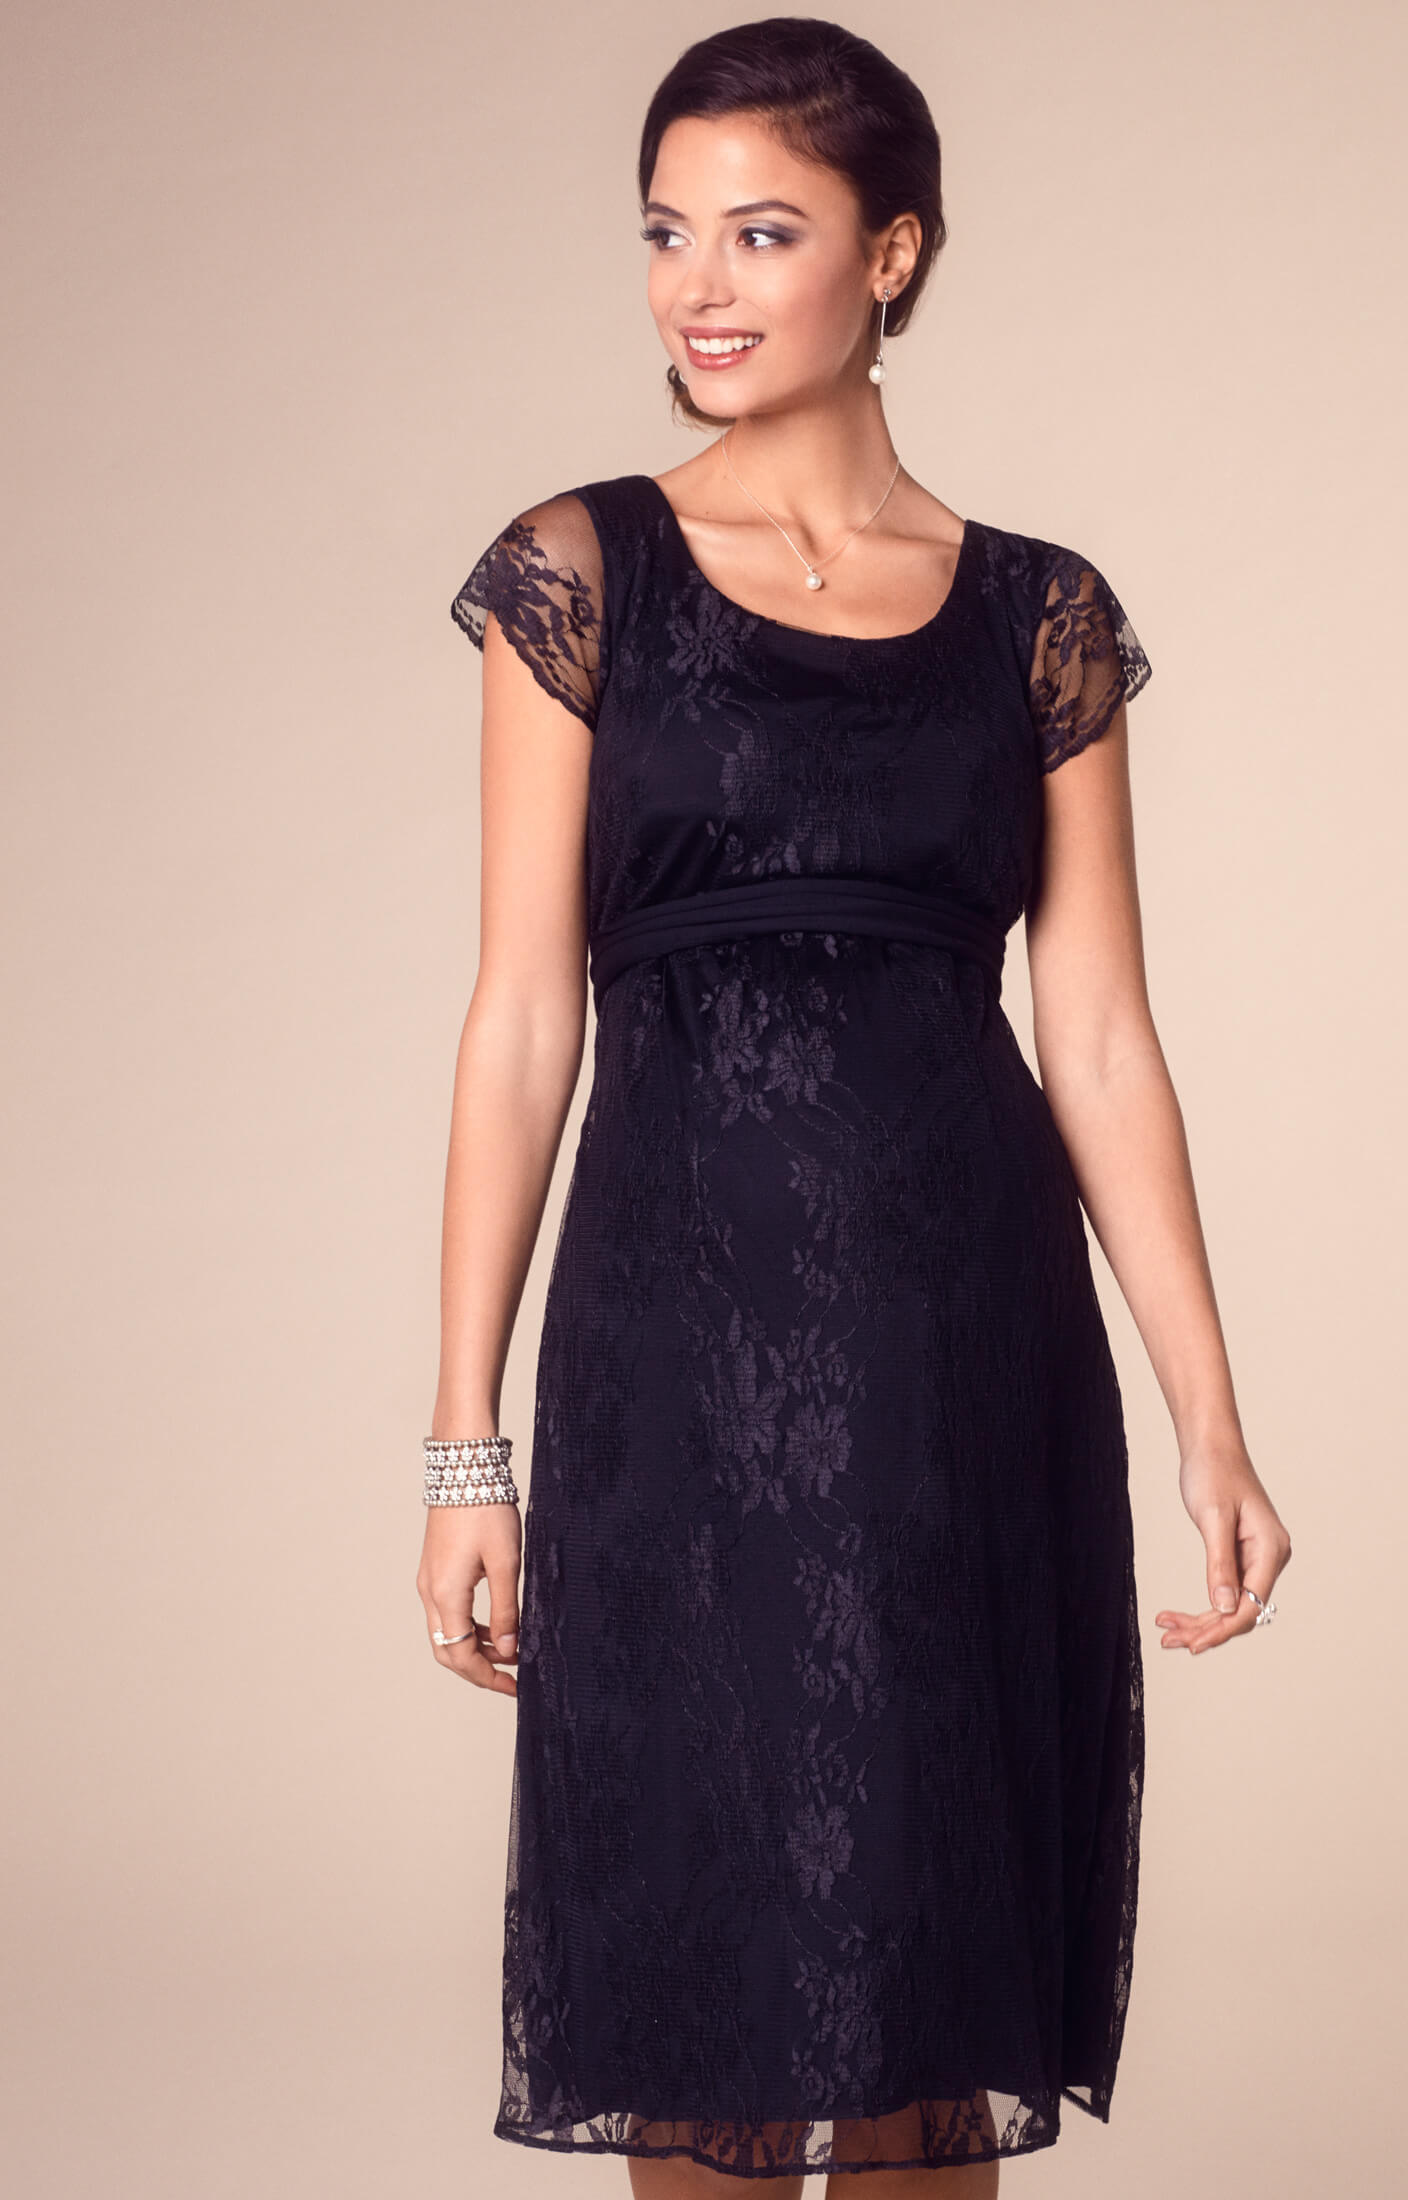 April Maternity Nursing Dress Black - Maternity Wedding Dresses, Evening  Wear and Party Clothes by Tiffany Rose